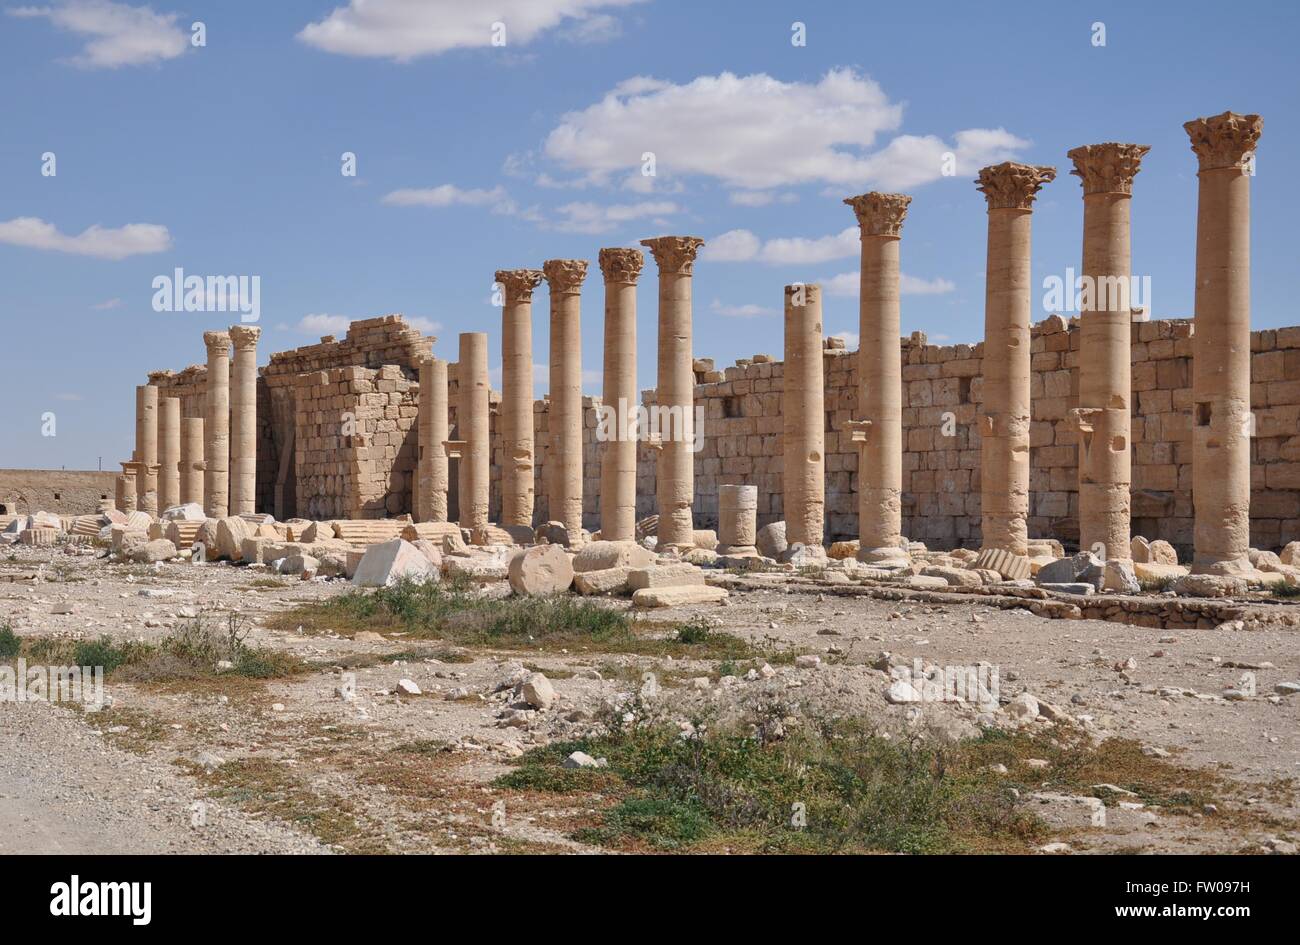 Palmyra. 31st Mar, 2016. Partially damaged ancient columns are seen at the National Museum in the ancient oasis caravan city of Palmyra in central Syria on March 31, 2016. The Syrian army recaptured the city of Palmyra on March 27 following intense battle against the Islamic State(IS) group, which has controlled the city since last May. © Ammar/Xinhua/Alamy Live News Stock Photo